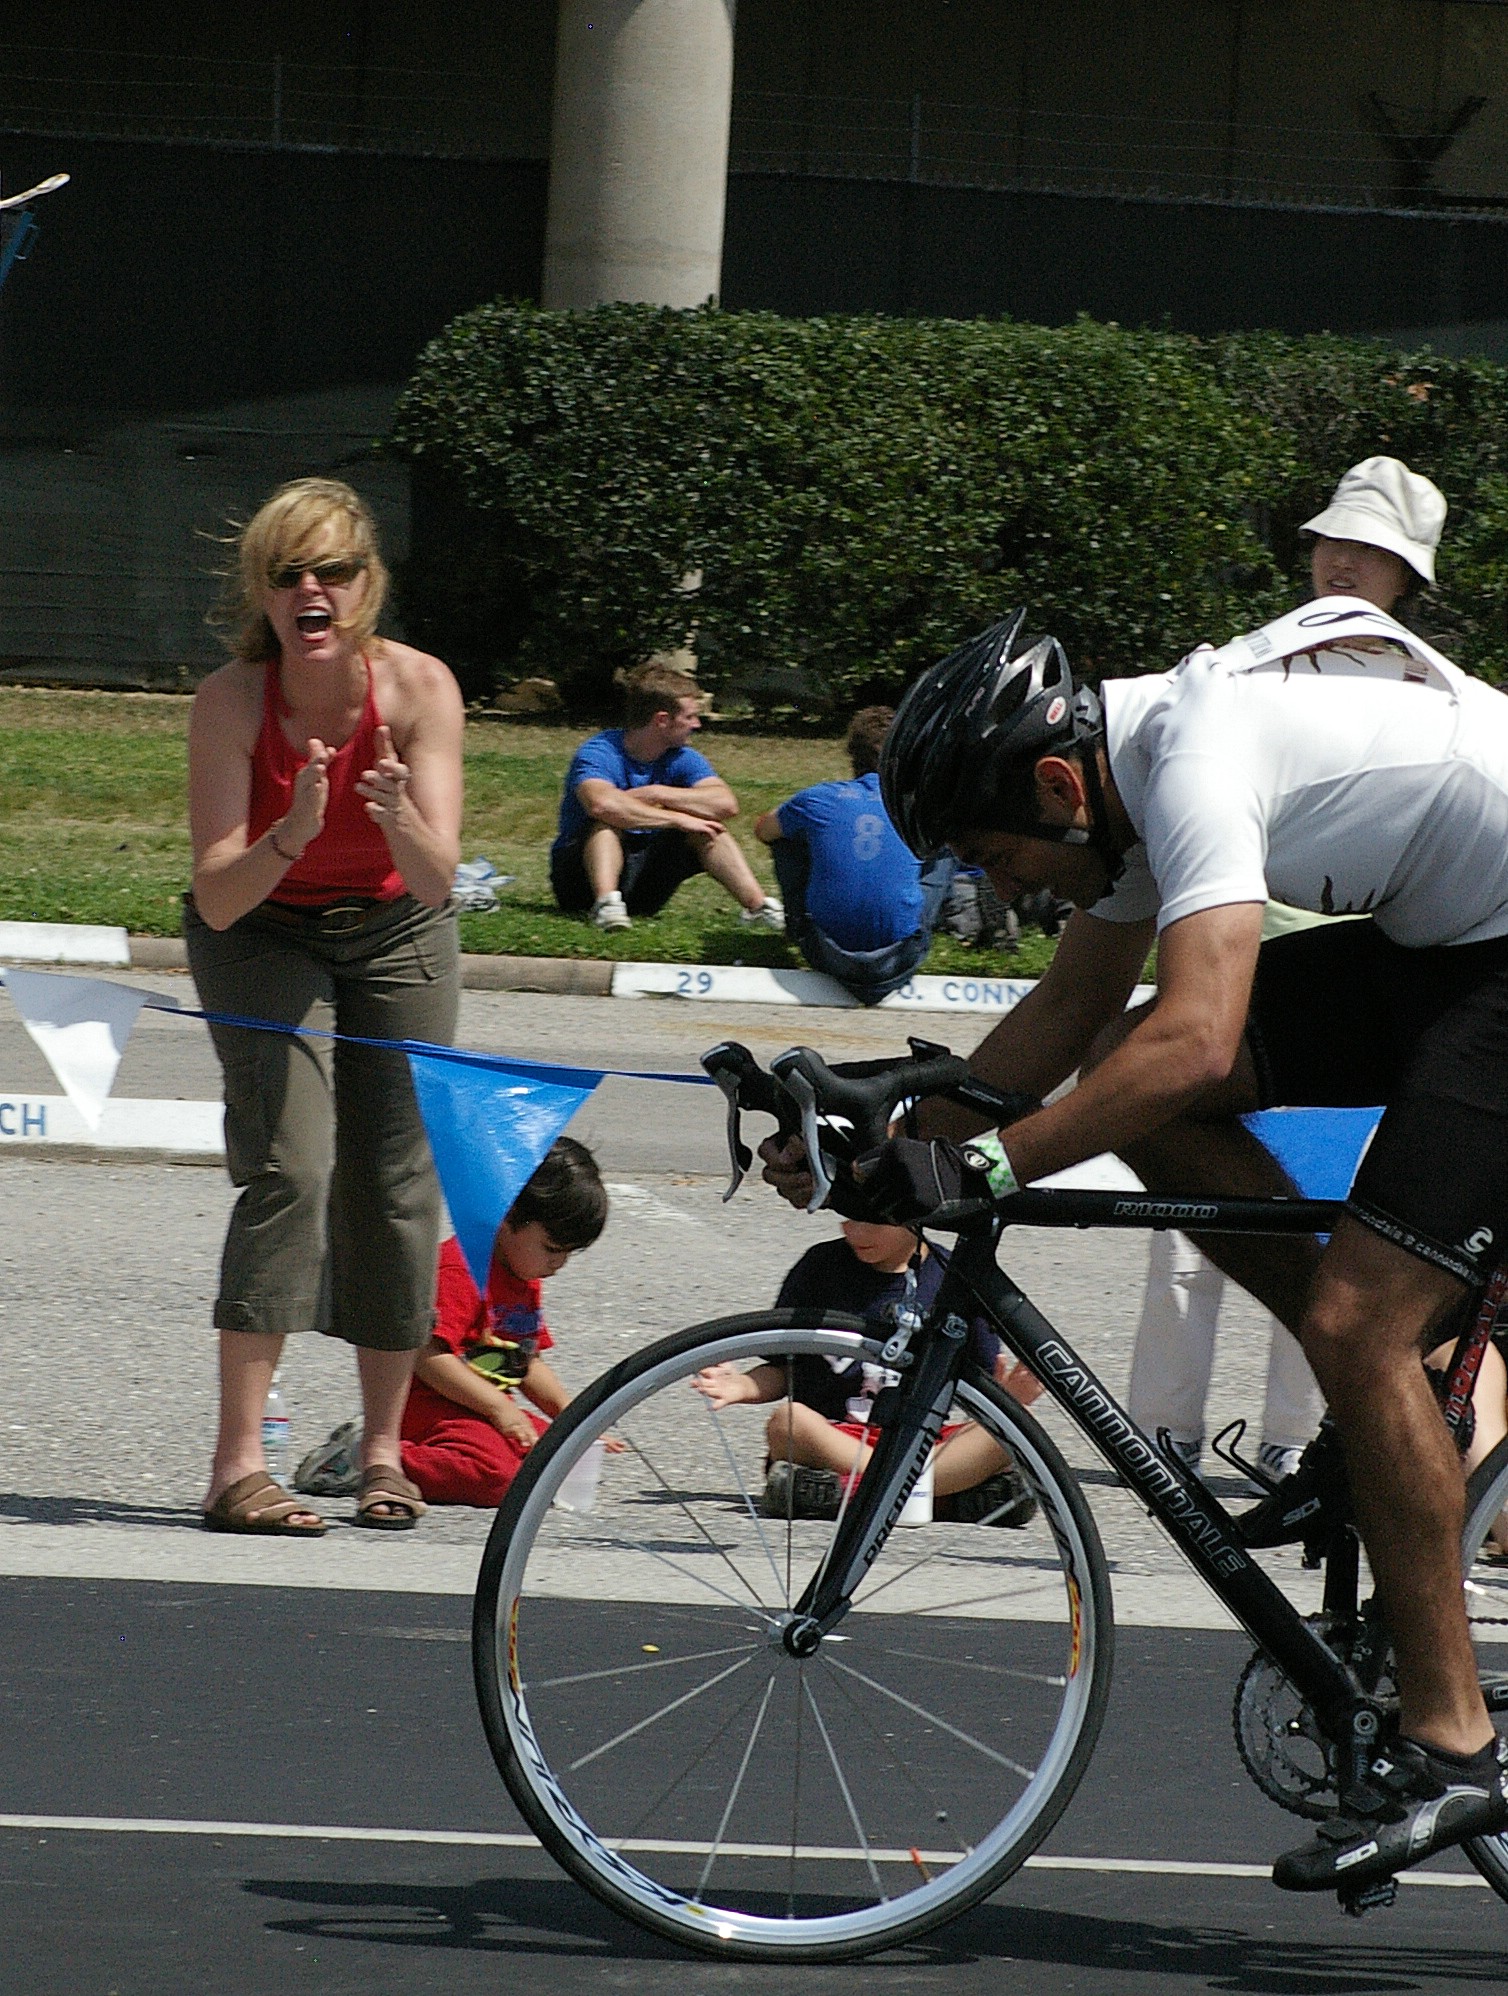 a cyclist with a large helmet on, is racing a bike